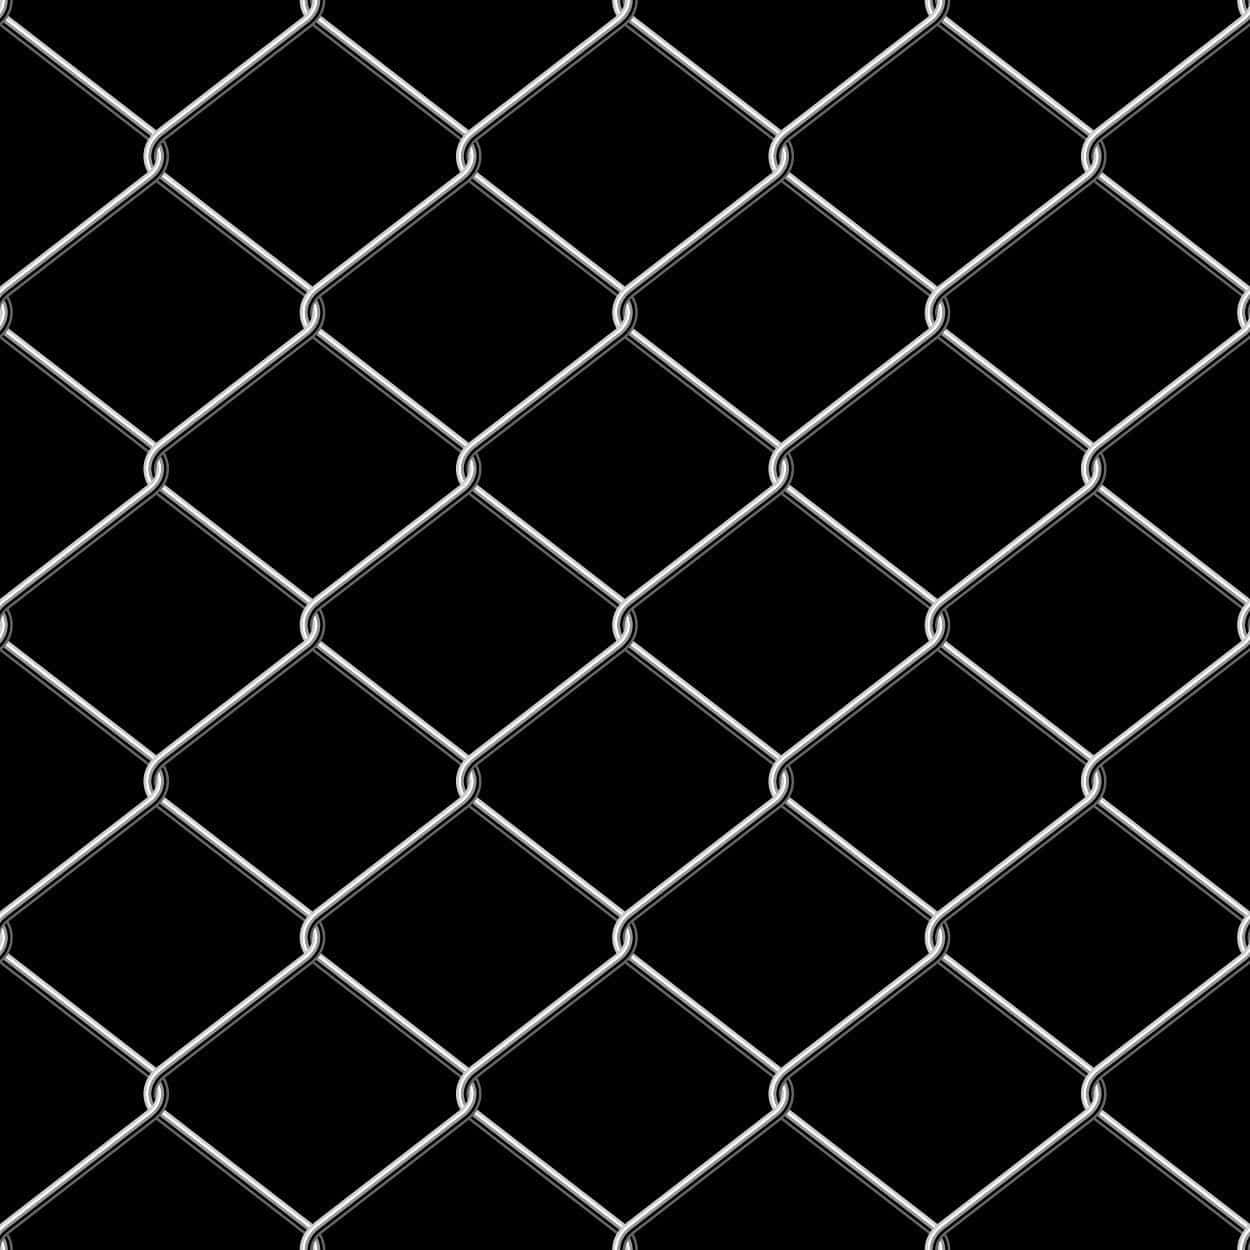 A White Chain Link Fence On A Black Background